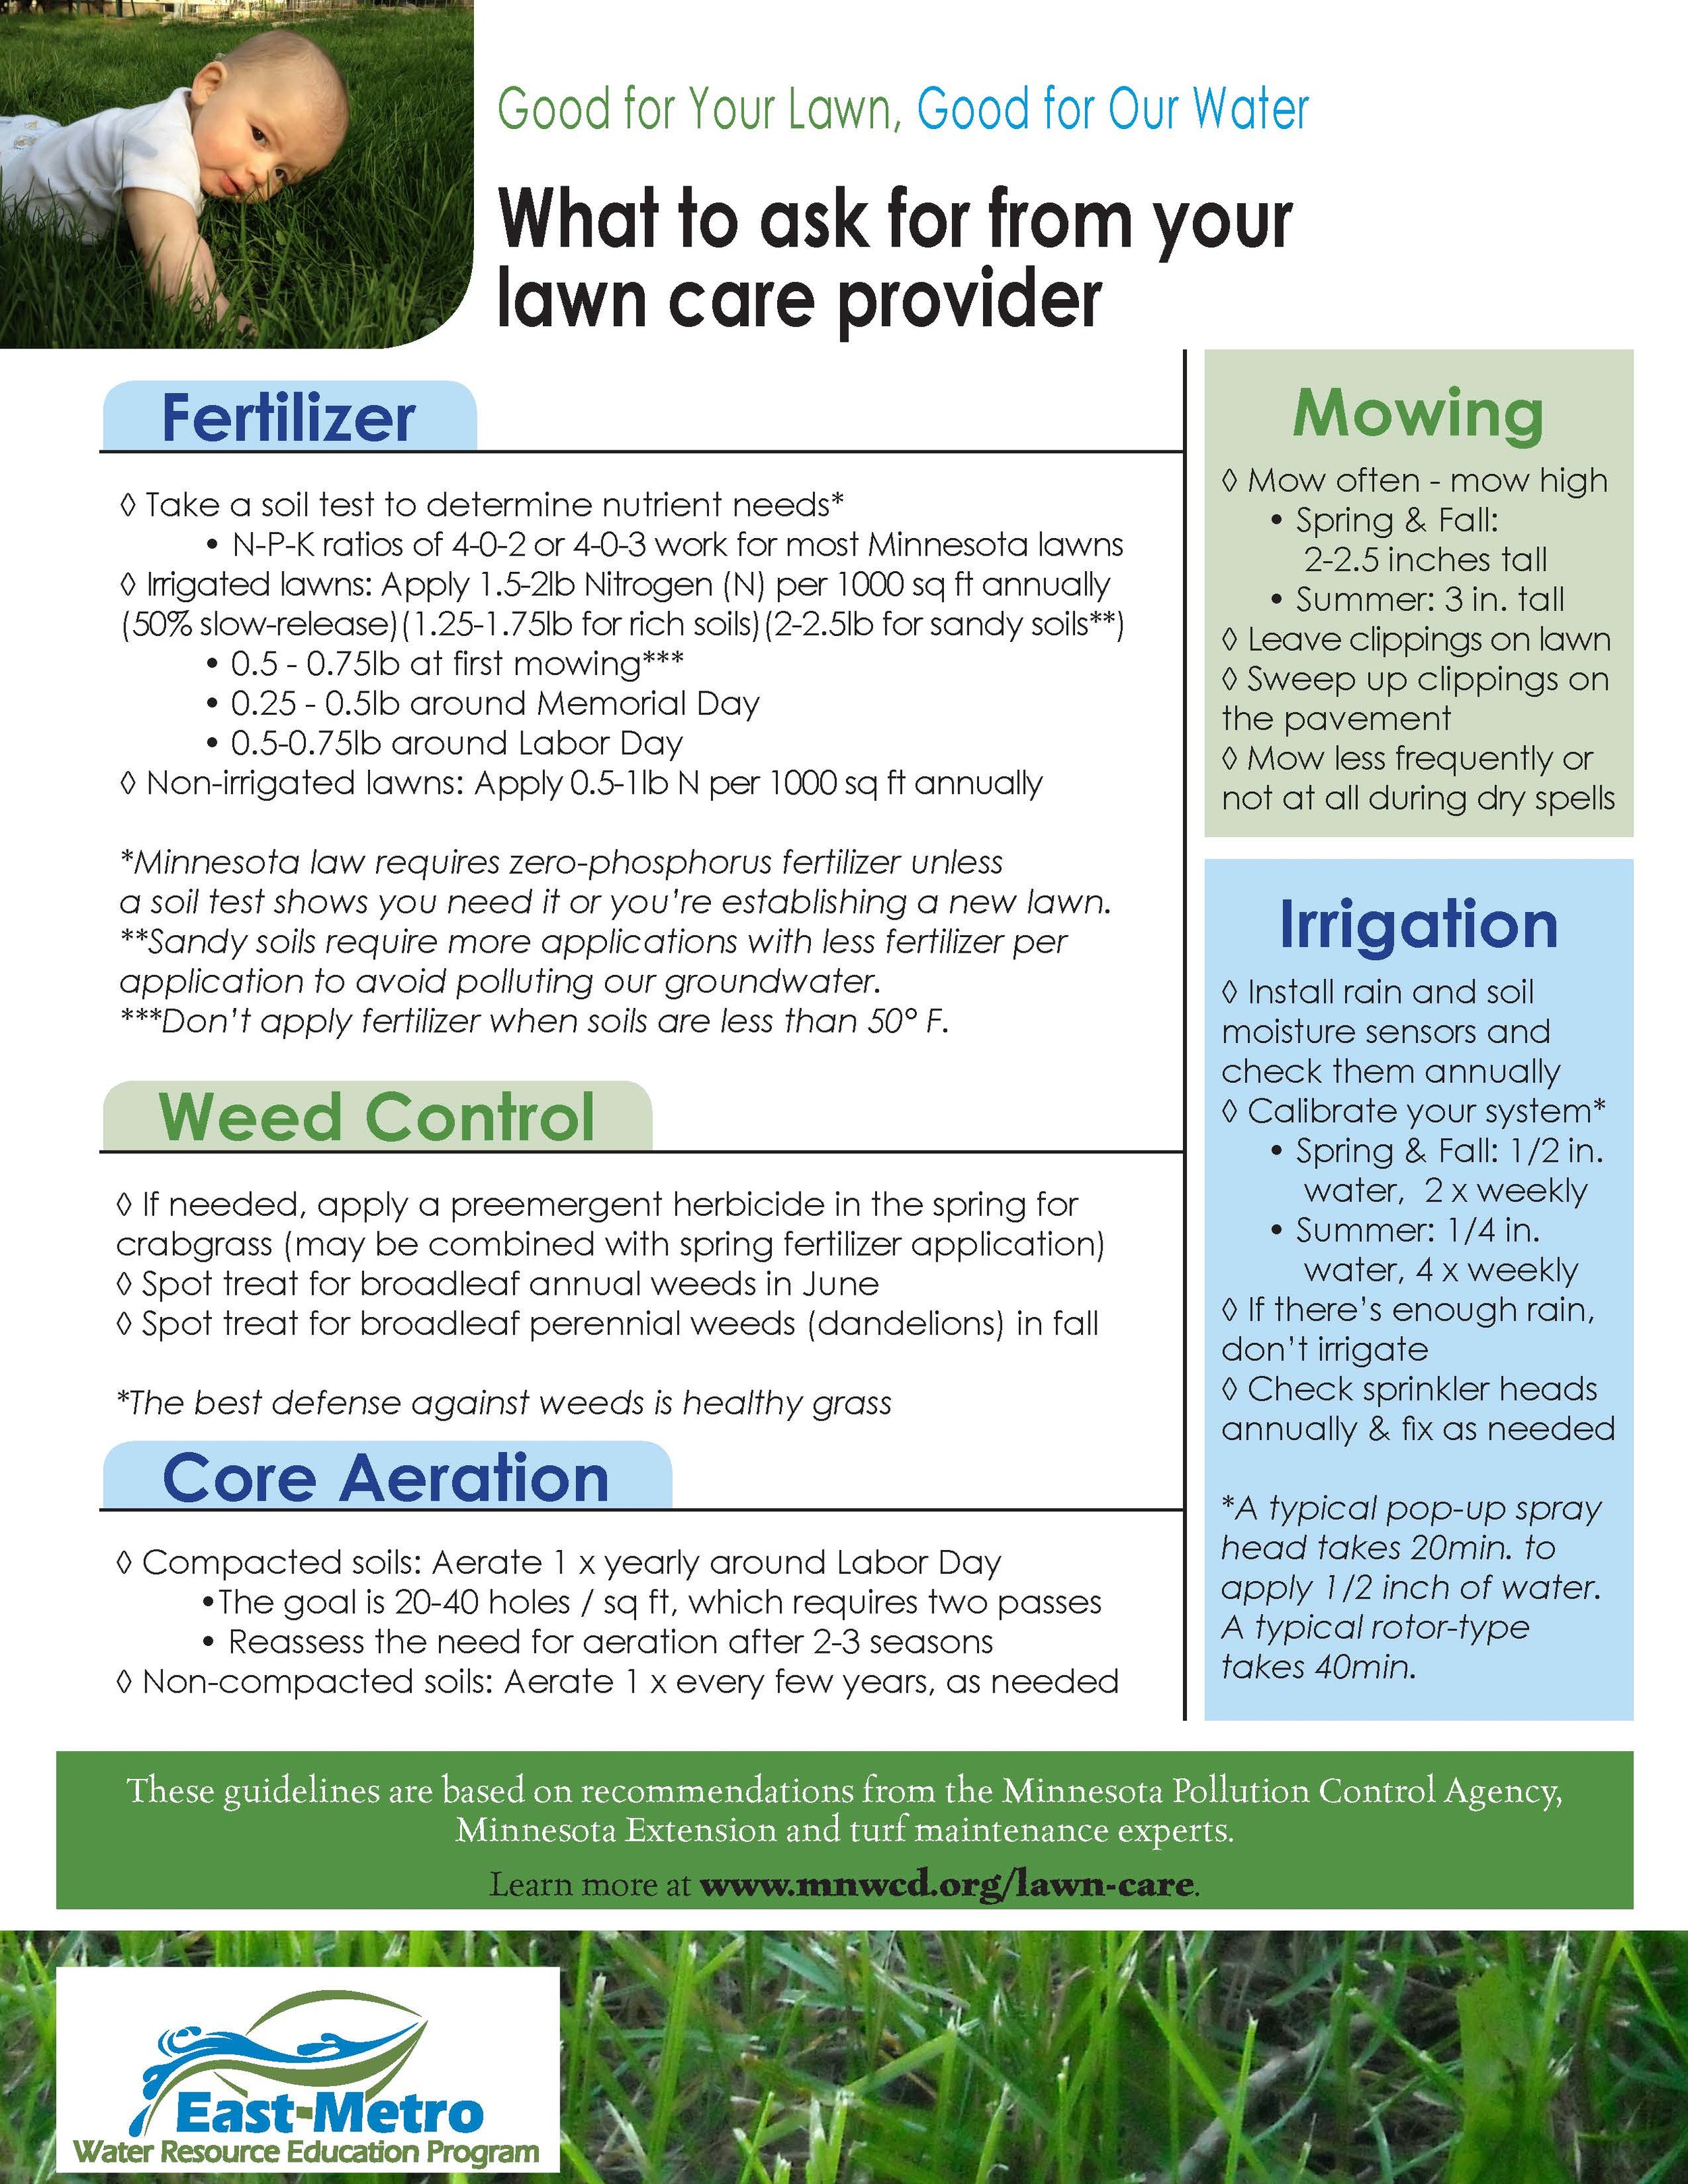 What to ask for from your lawn care provider